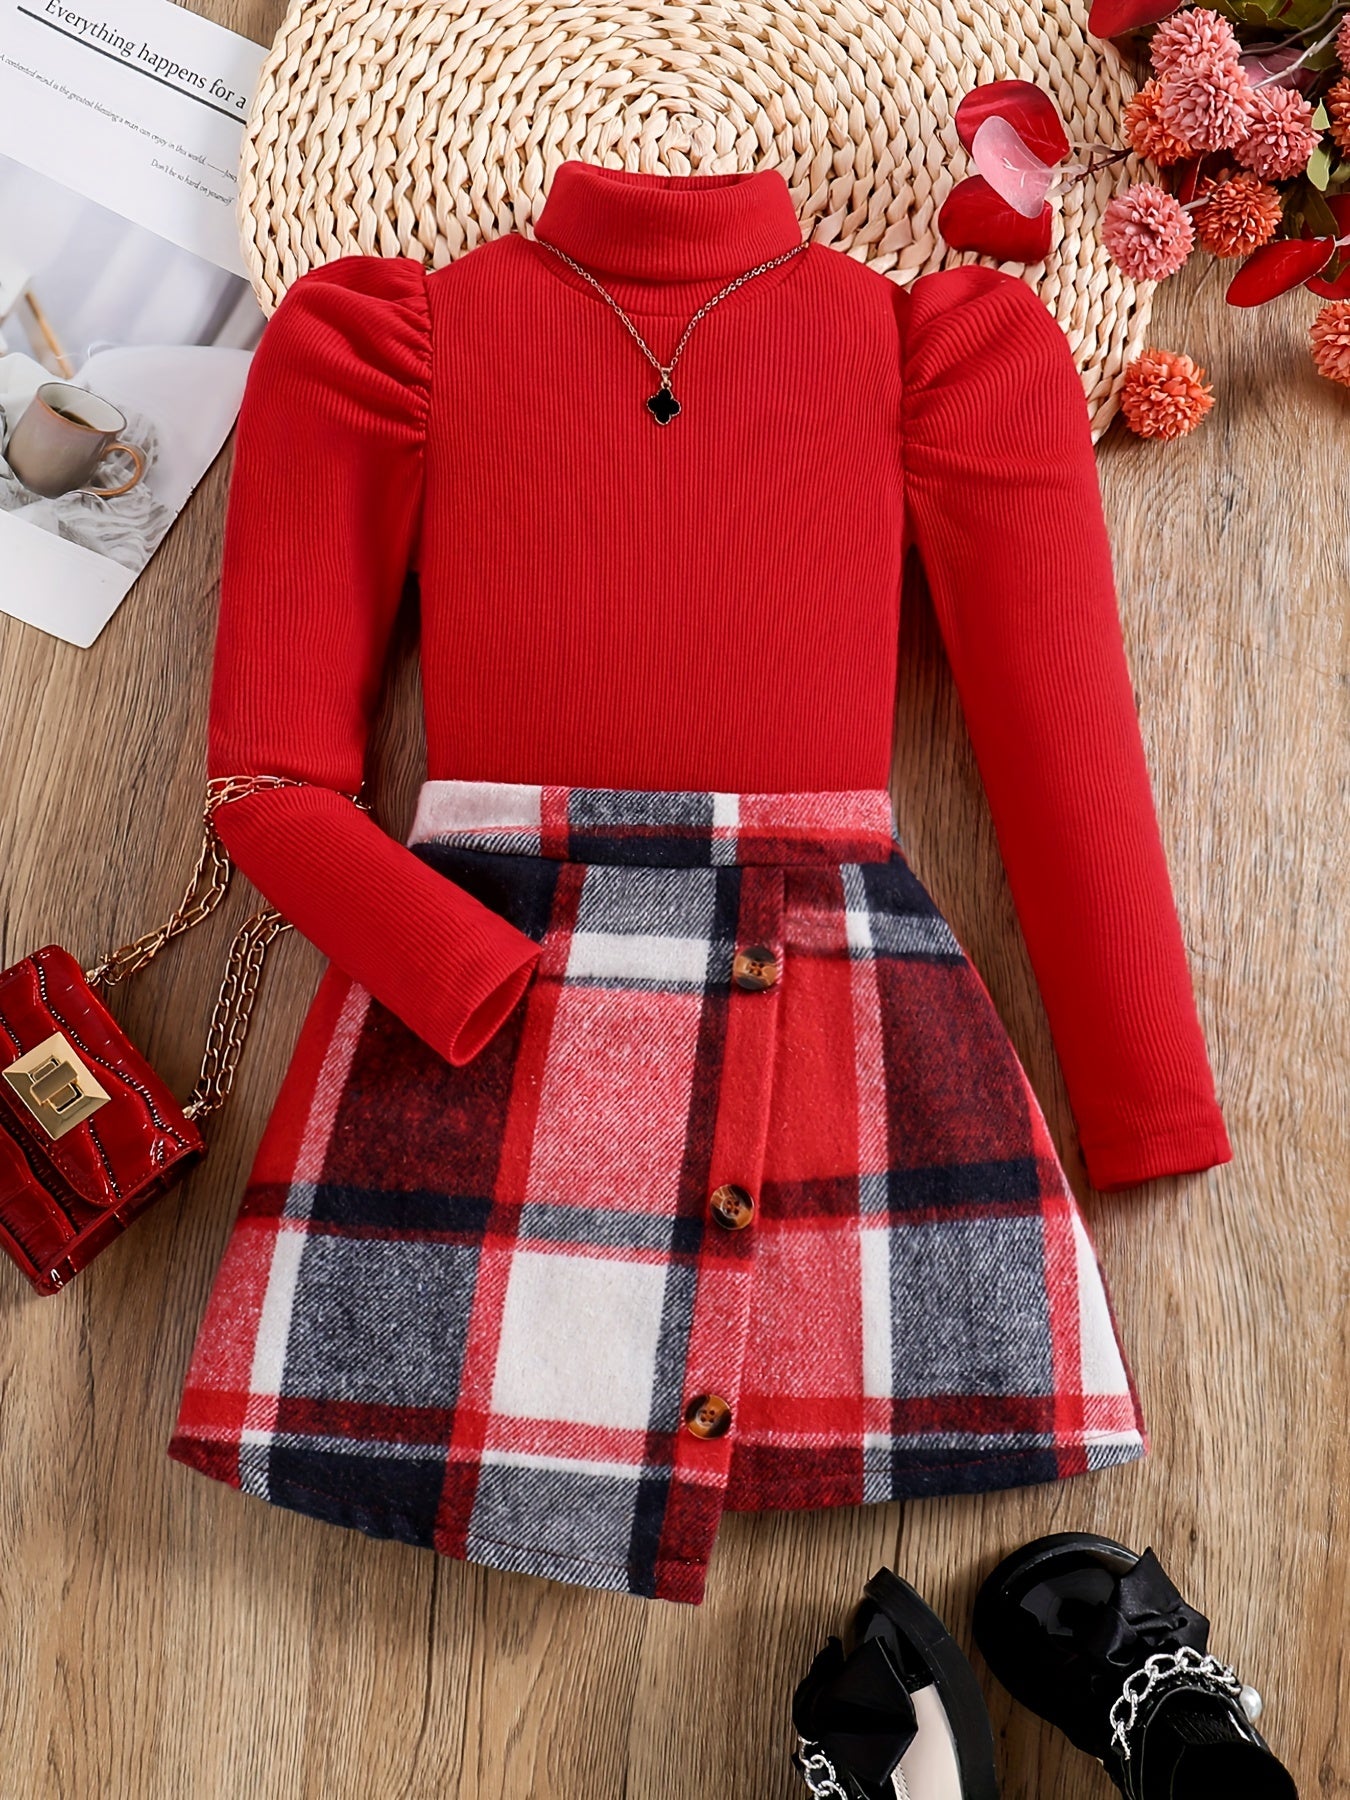 2pcs Girl's Elegant Outfit, Turtleneck Top & Plaid Pattern Skirt Set, Kid's Clothes For Spring Autumn Winter, Gift For New Year